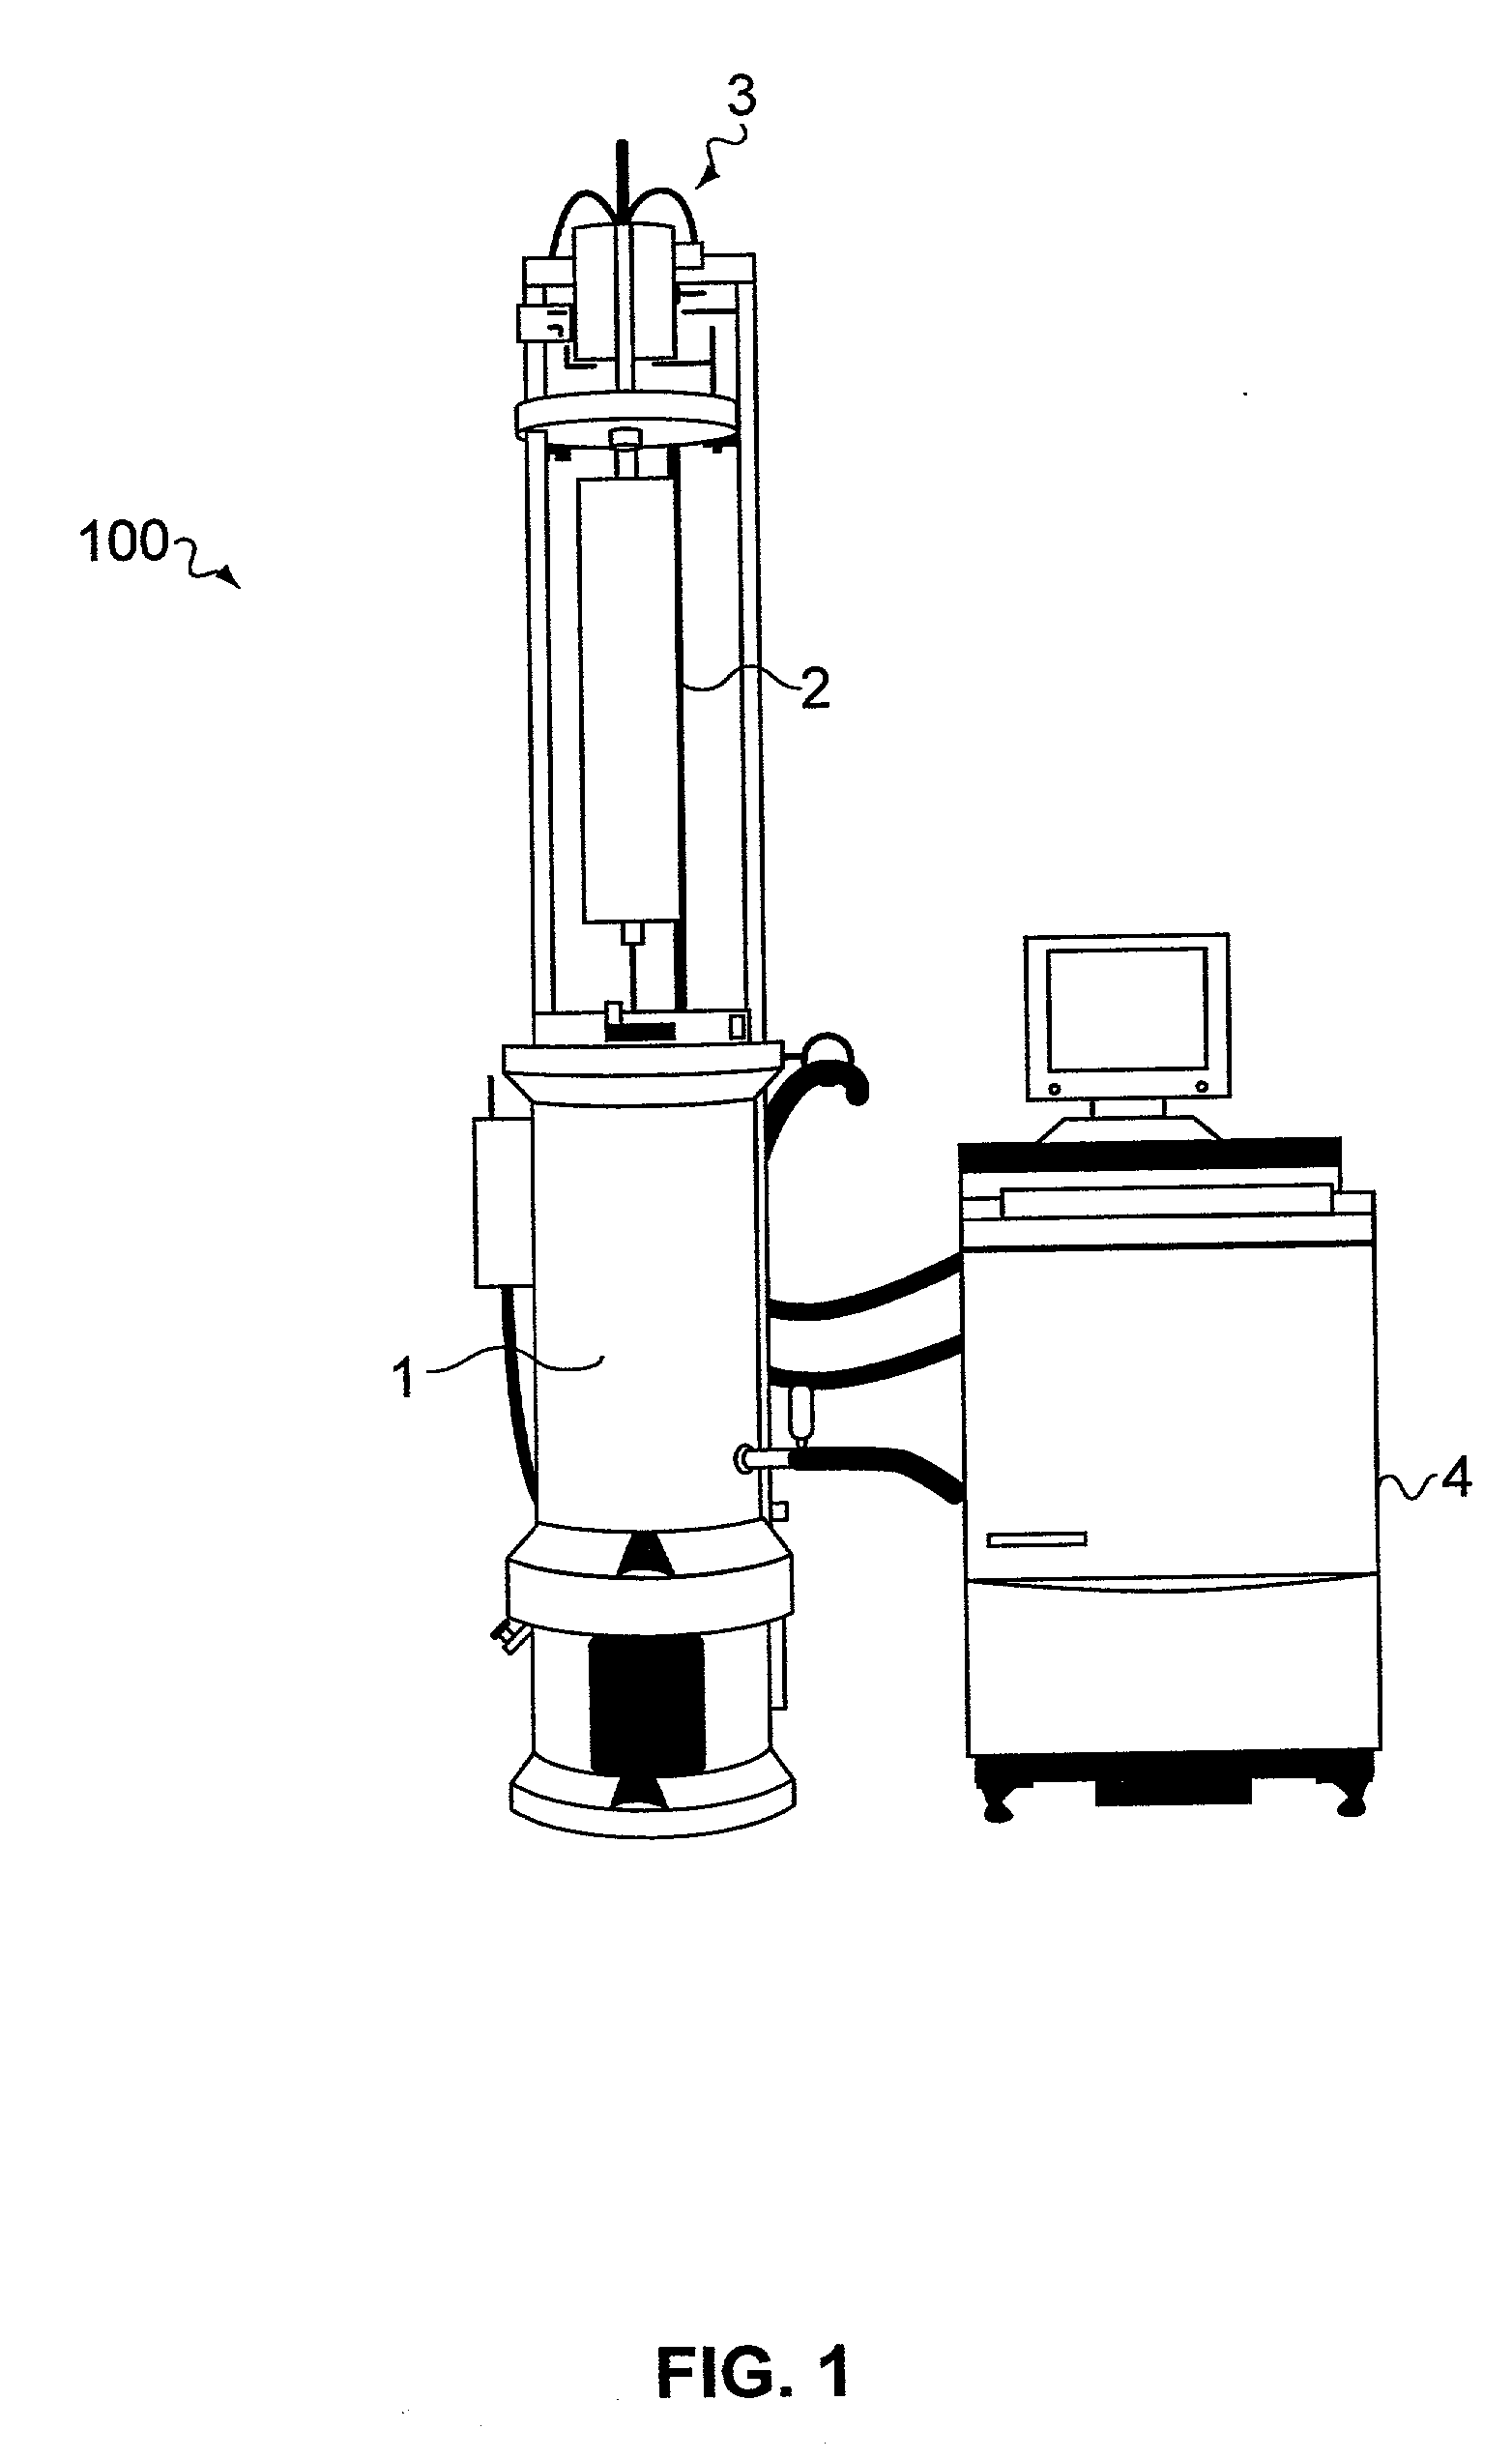 Centrifuge with removable core for scalable centrifugation